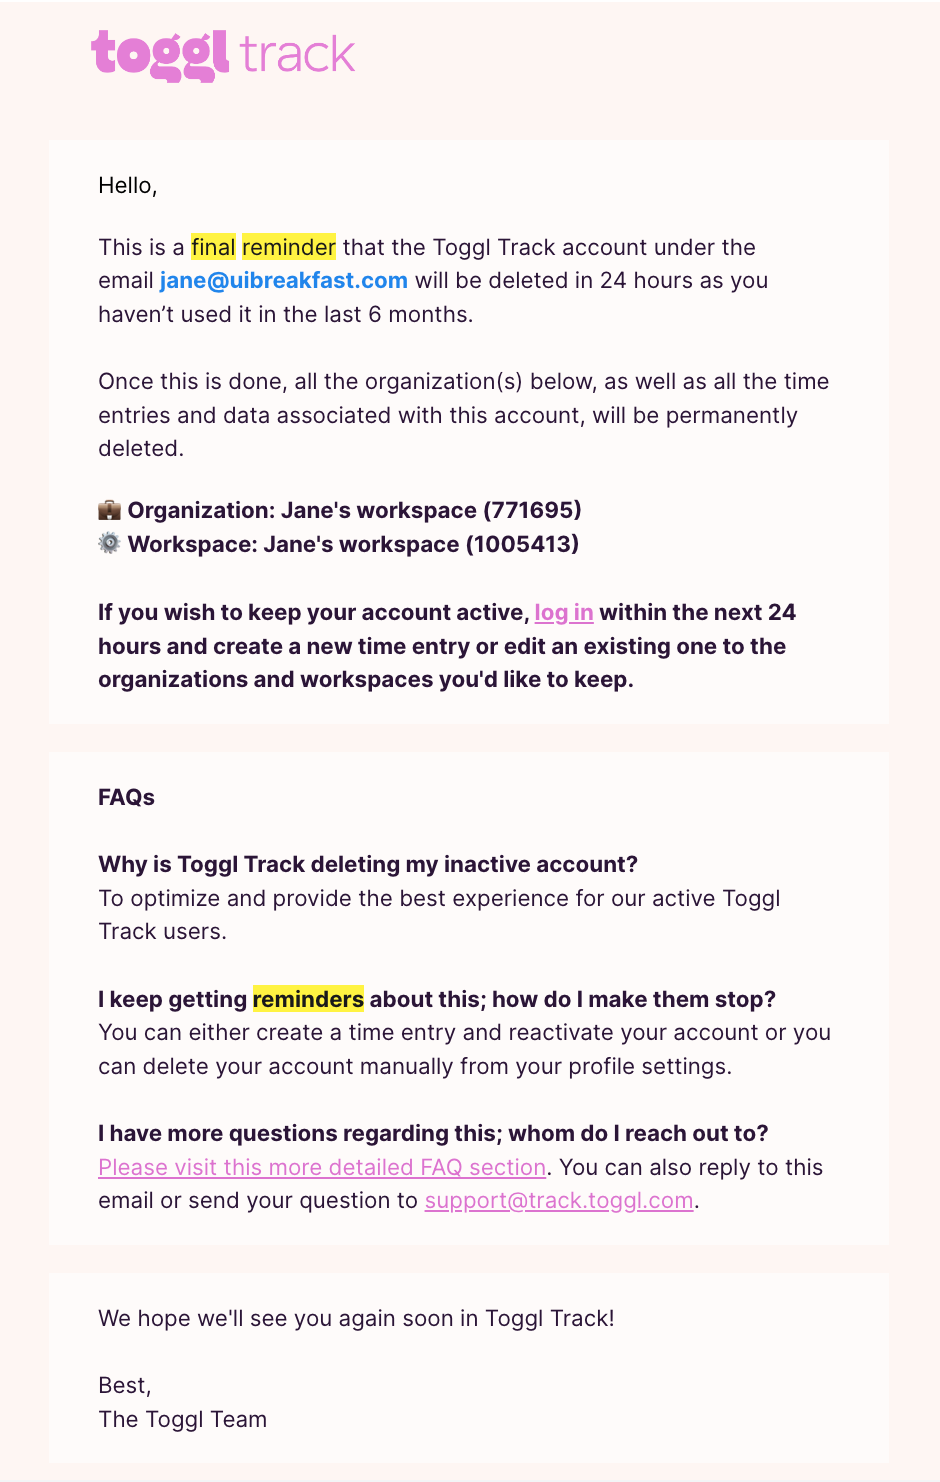 Account Removal Emails: Screenshot of Toggl Track's account deletion notification email to users